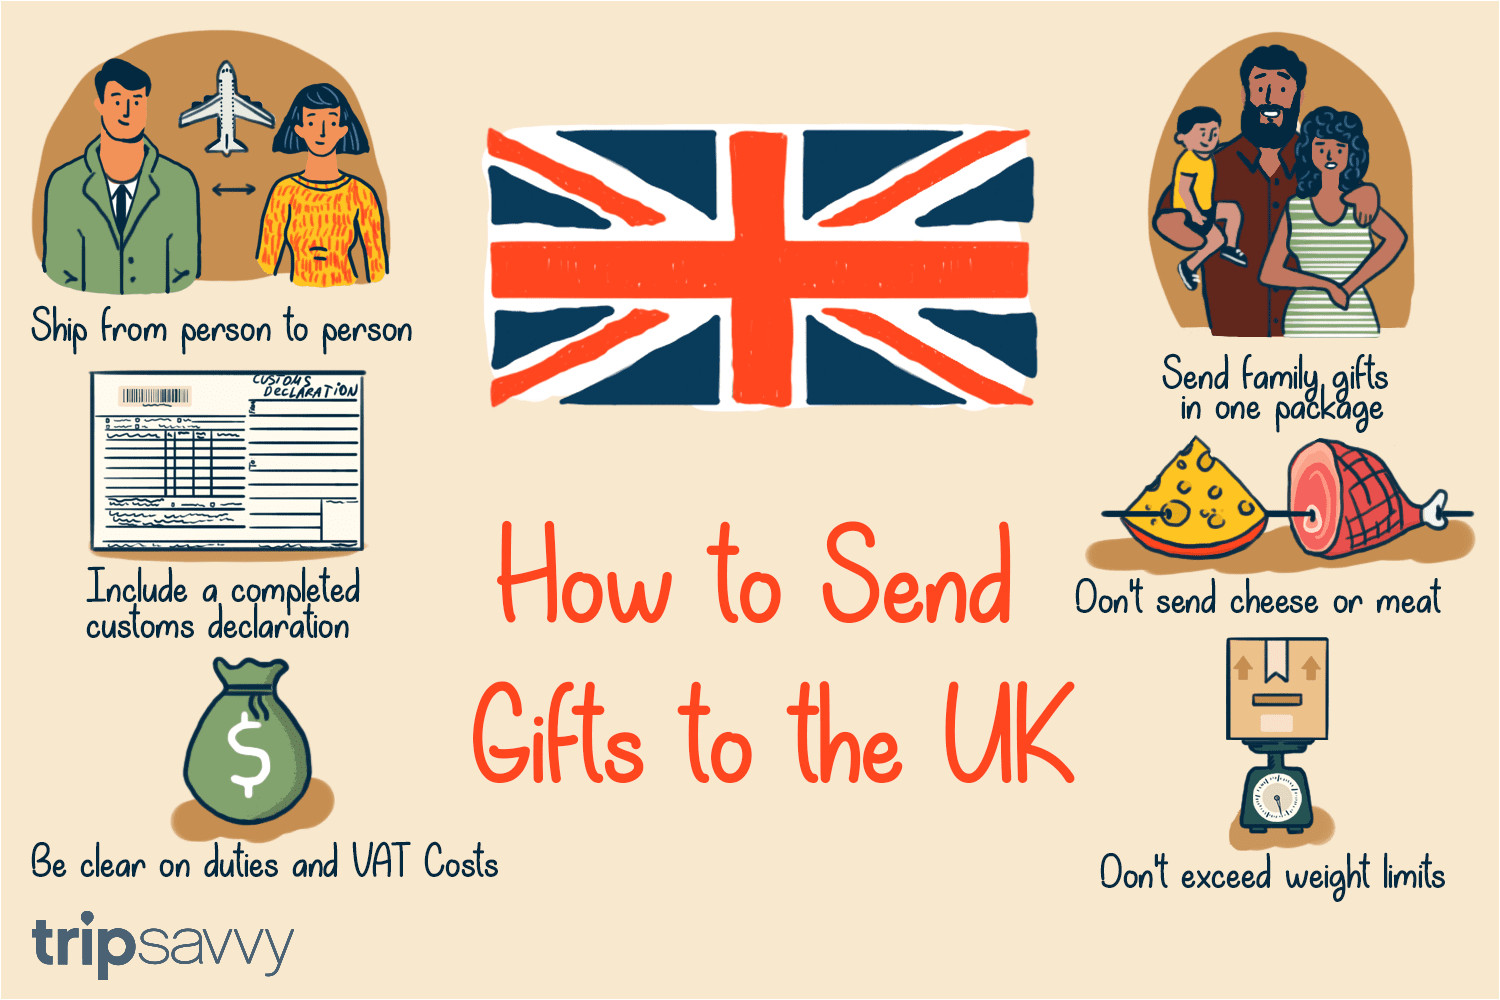 sending gifts to the uk 1661518 v3 5bd86cfbc9e77c0026559584 png